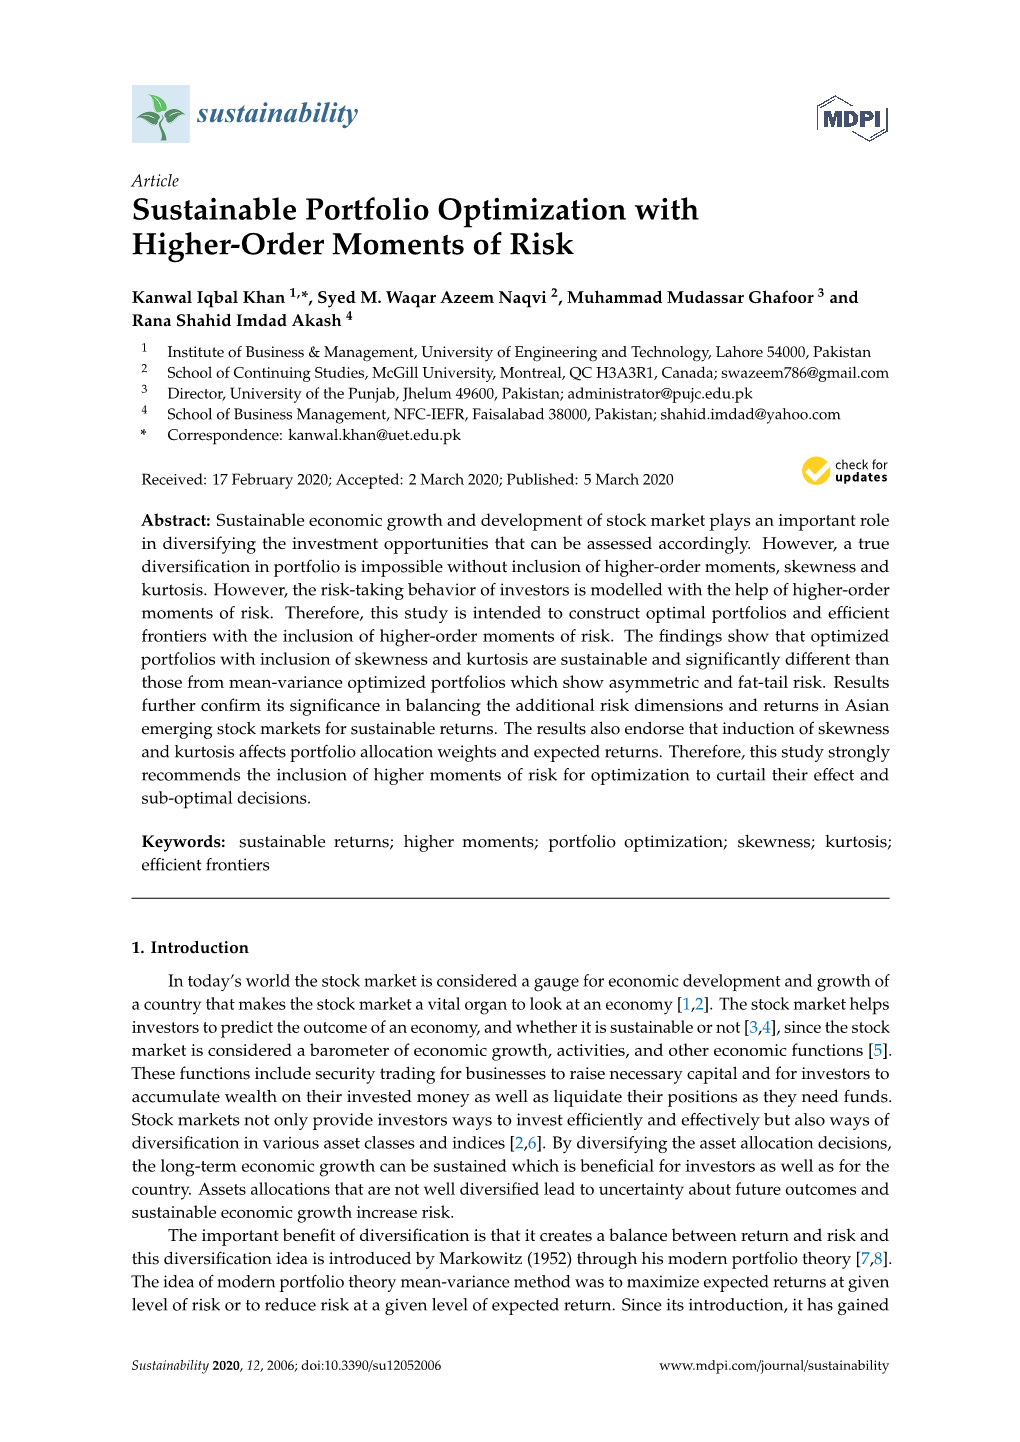 Sustainable Portfolio Optimization with Higher-Order Moments of Risk